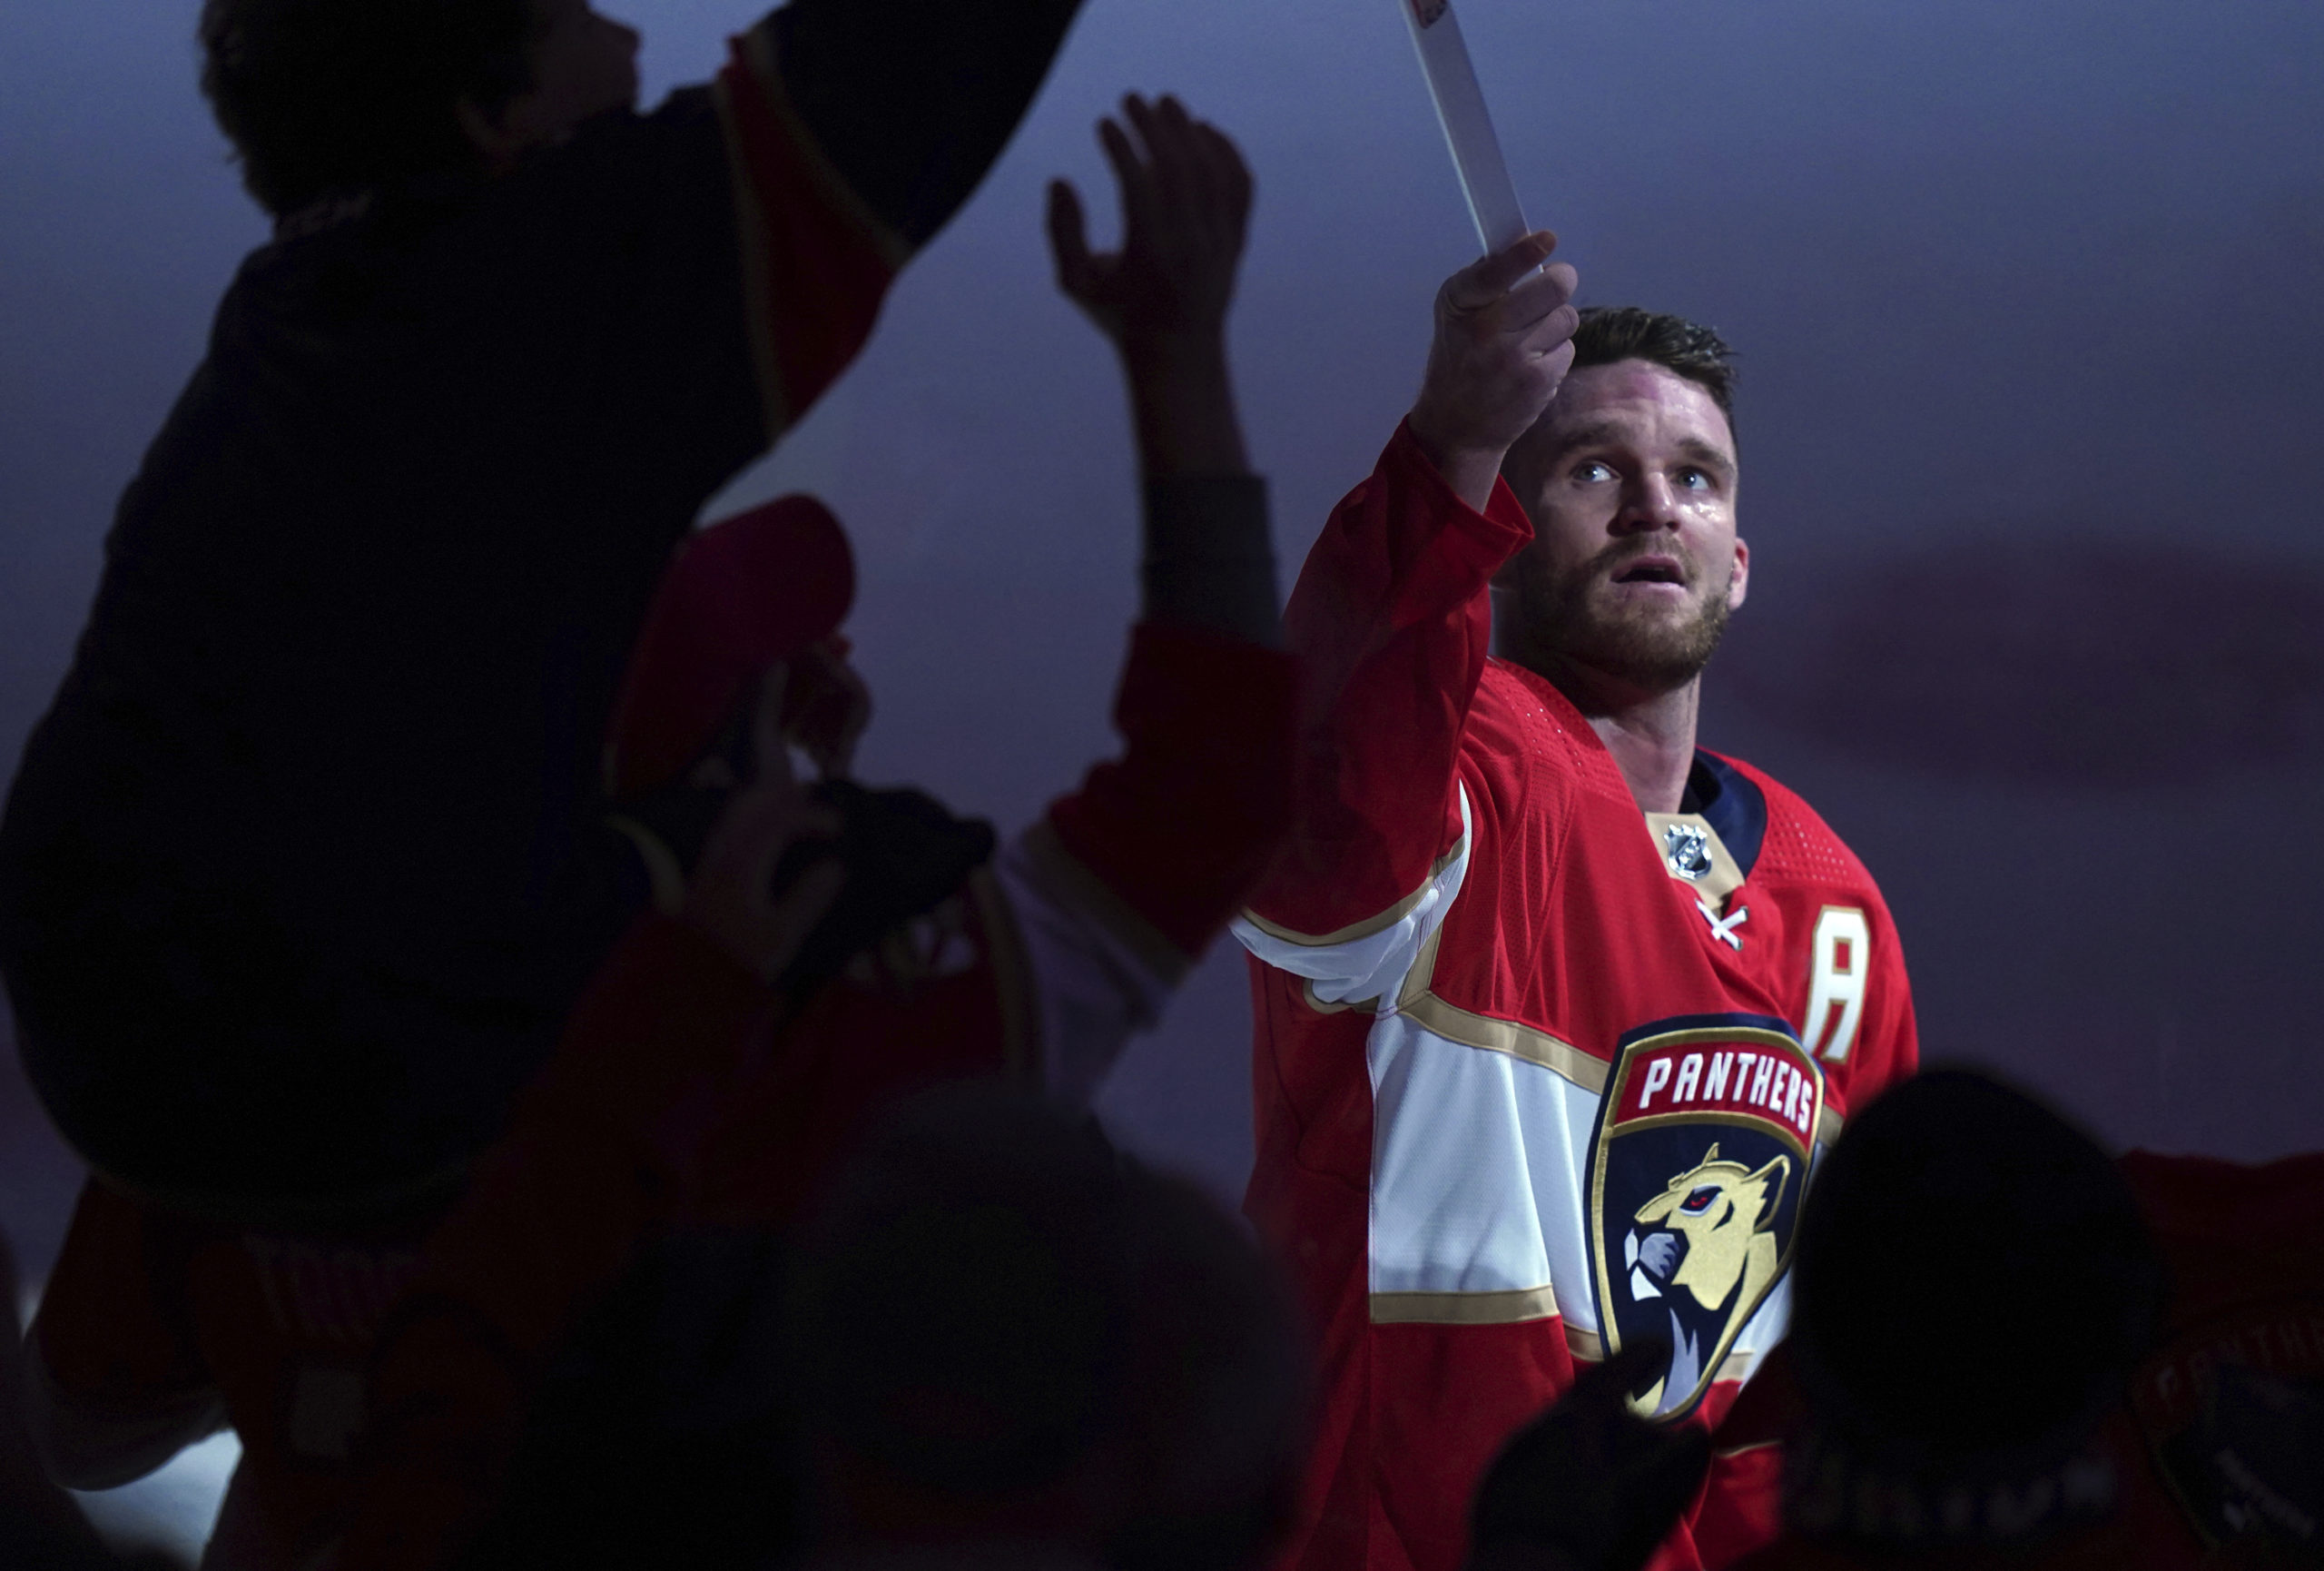 Panthers hart huberdeau